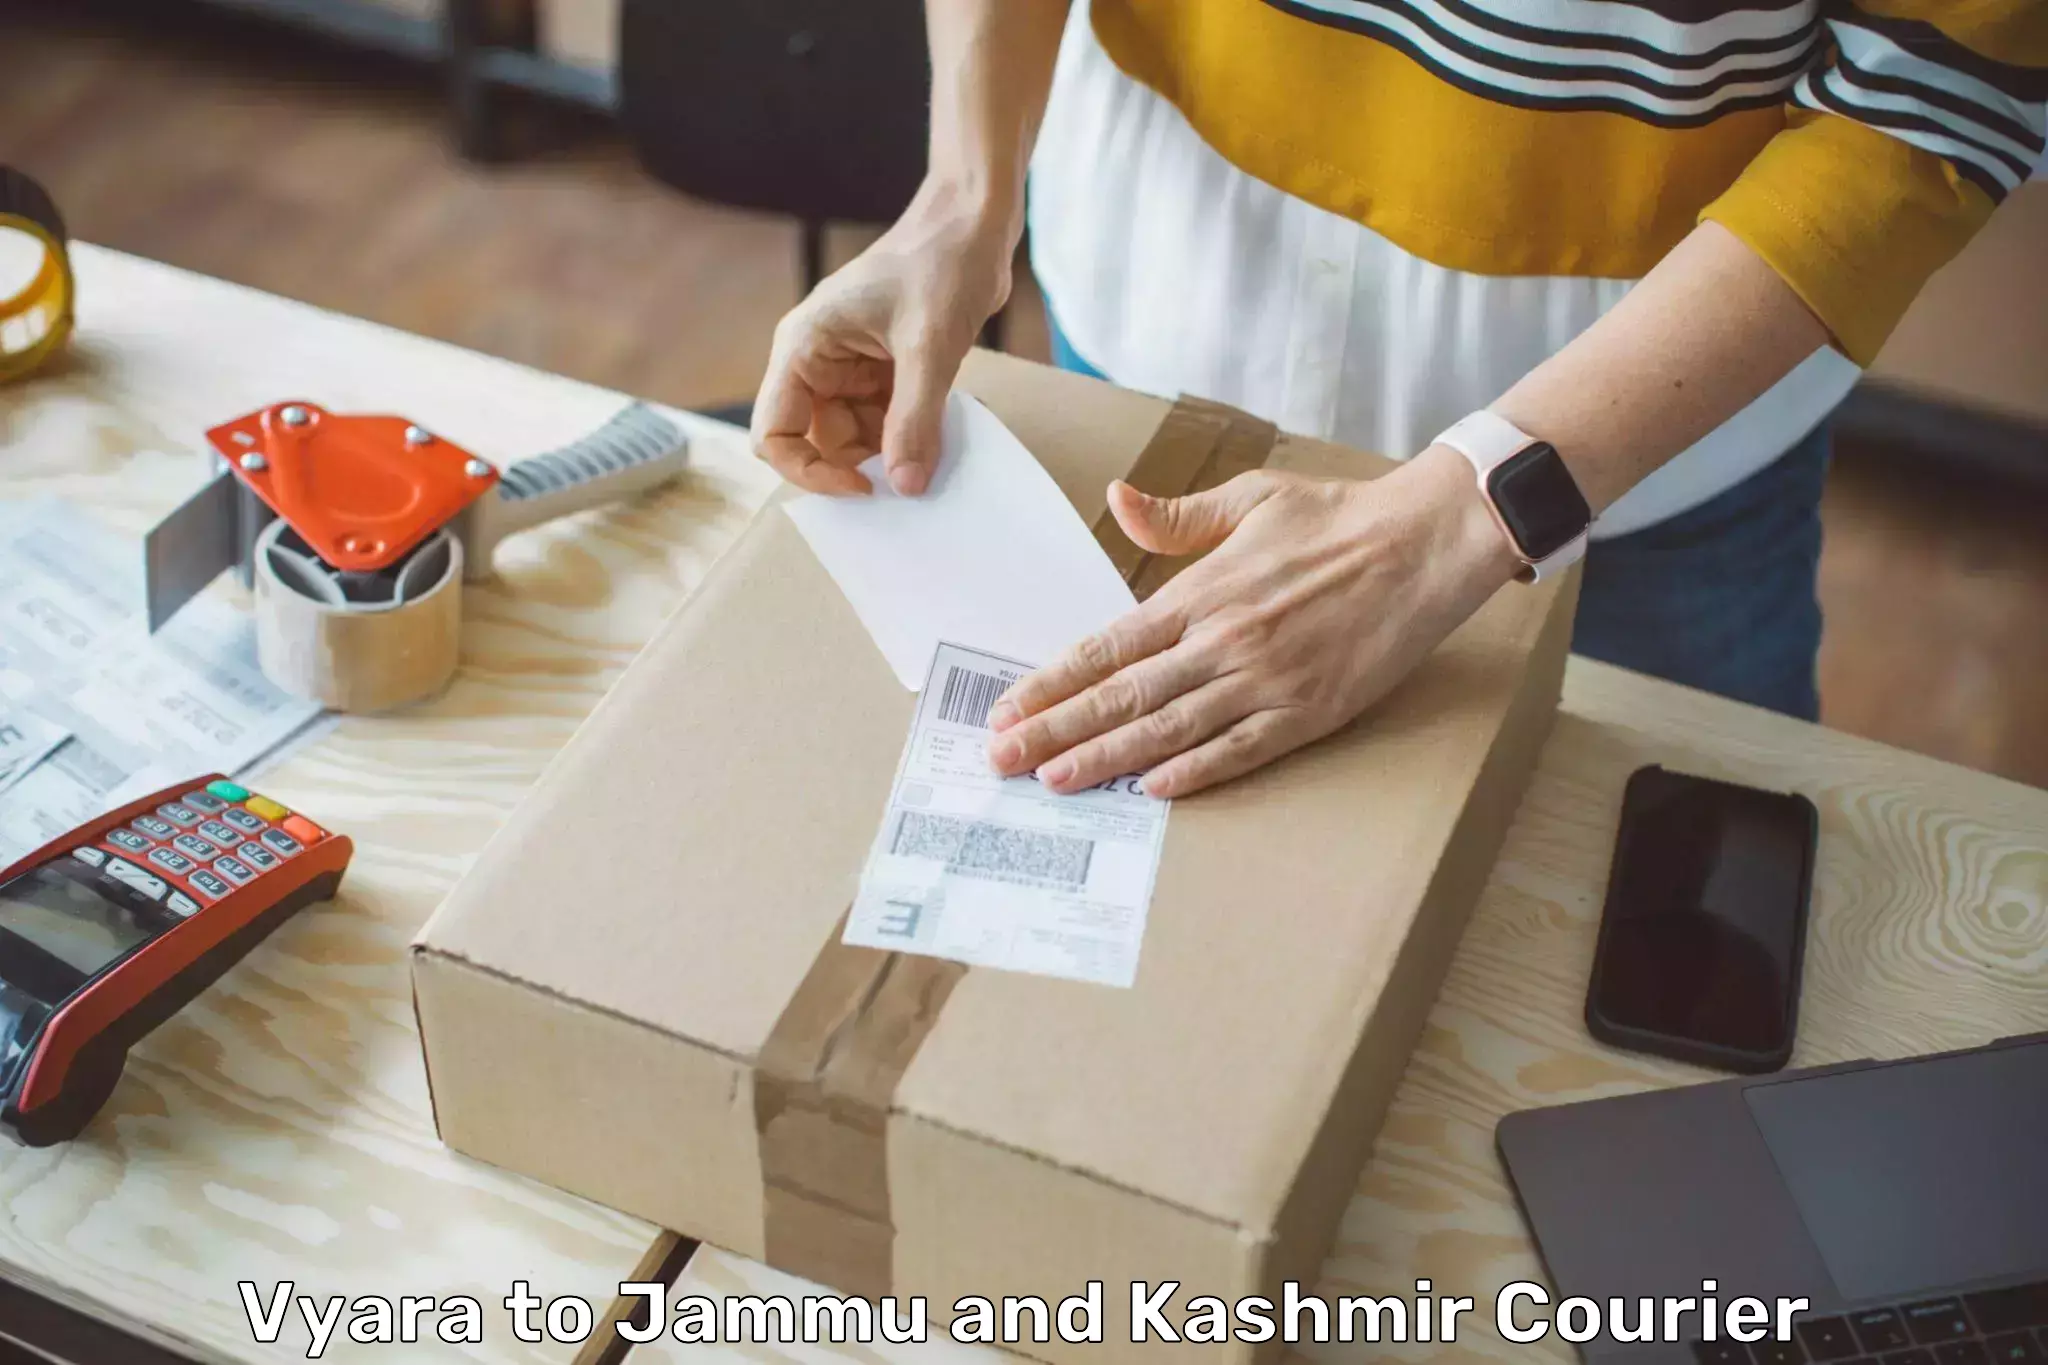 Nationwide parcel services Vyara to Pulwama